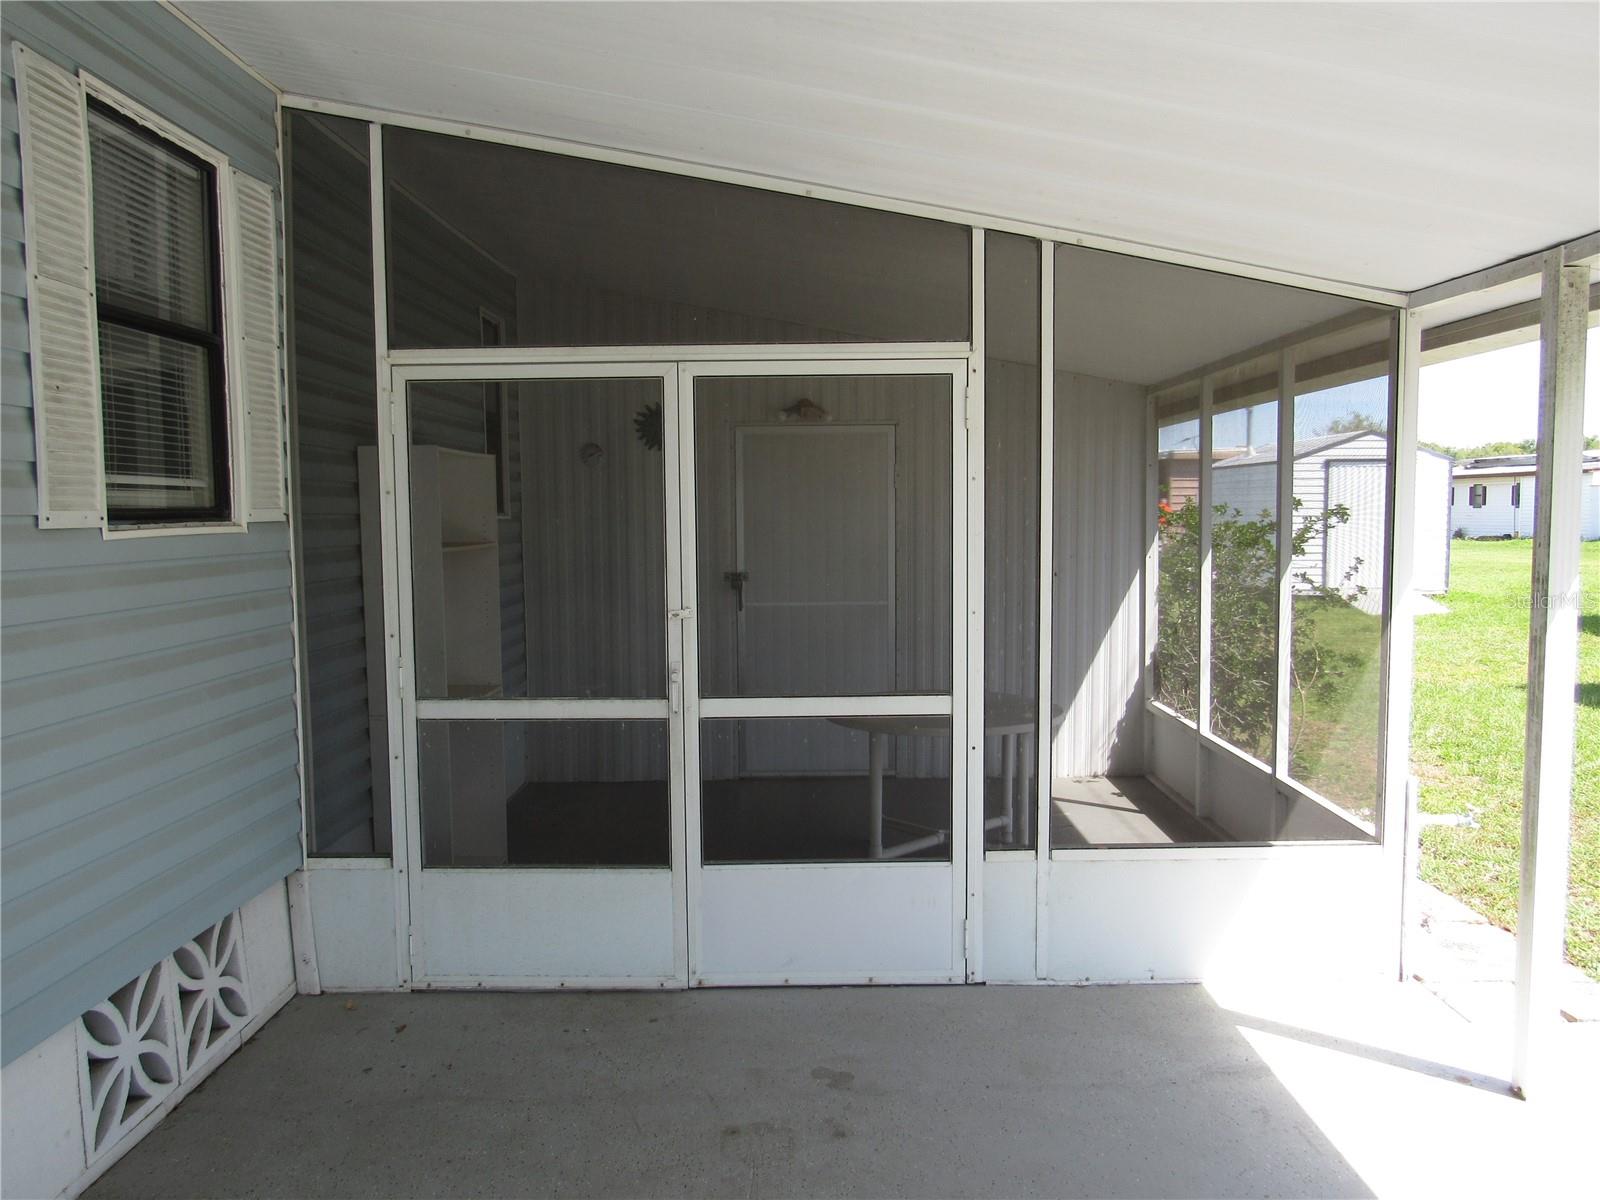 Attached screen porch.